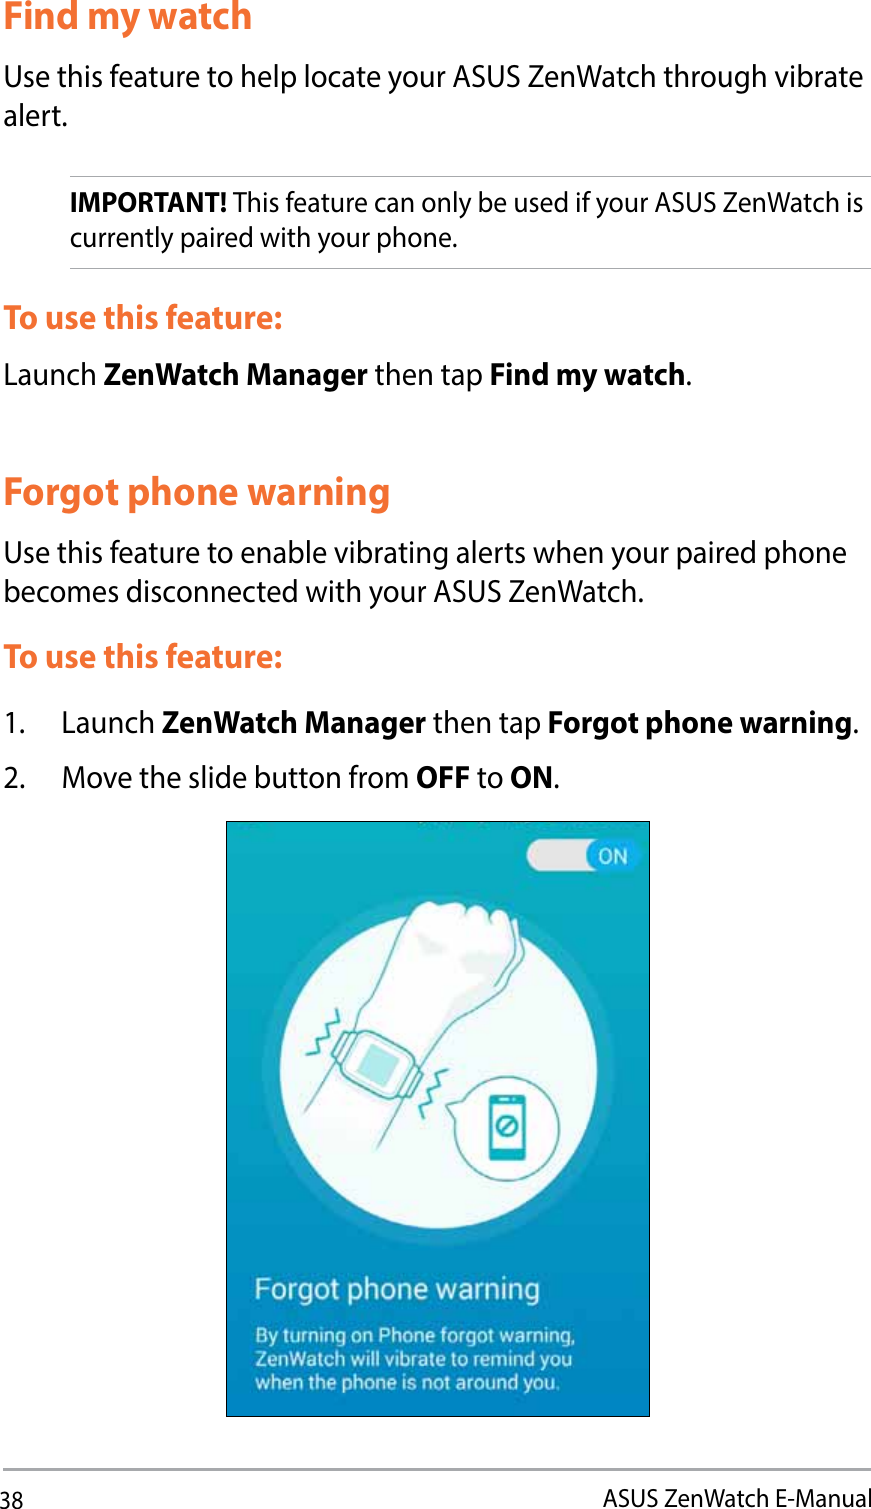 38ASUS ZenWatch E-ManualFind my watchUse this feature to help locate your ASUS ZenWatch through vibrate alert. IMPORTANT! This feature can only be used if your ASUS ZenWatch is currently paired with your phone.To use this feature:Launch ZenWatch Manager then tap Find my watch.Forgot phone warningUse this feature to enable vibrating alerts when your paired phone becomes disconnected with your ASUS ZenWatch. To use this feature:1. Launch ZenWatch Manager then tap Forgot phone warning.2.  Move the slide button from OFF to ON. 